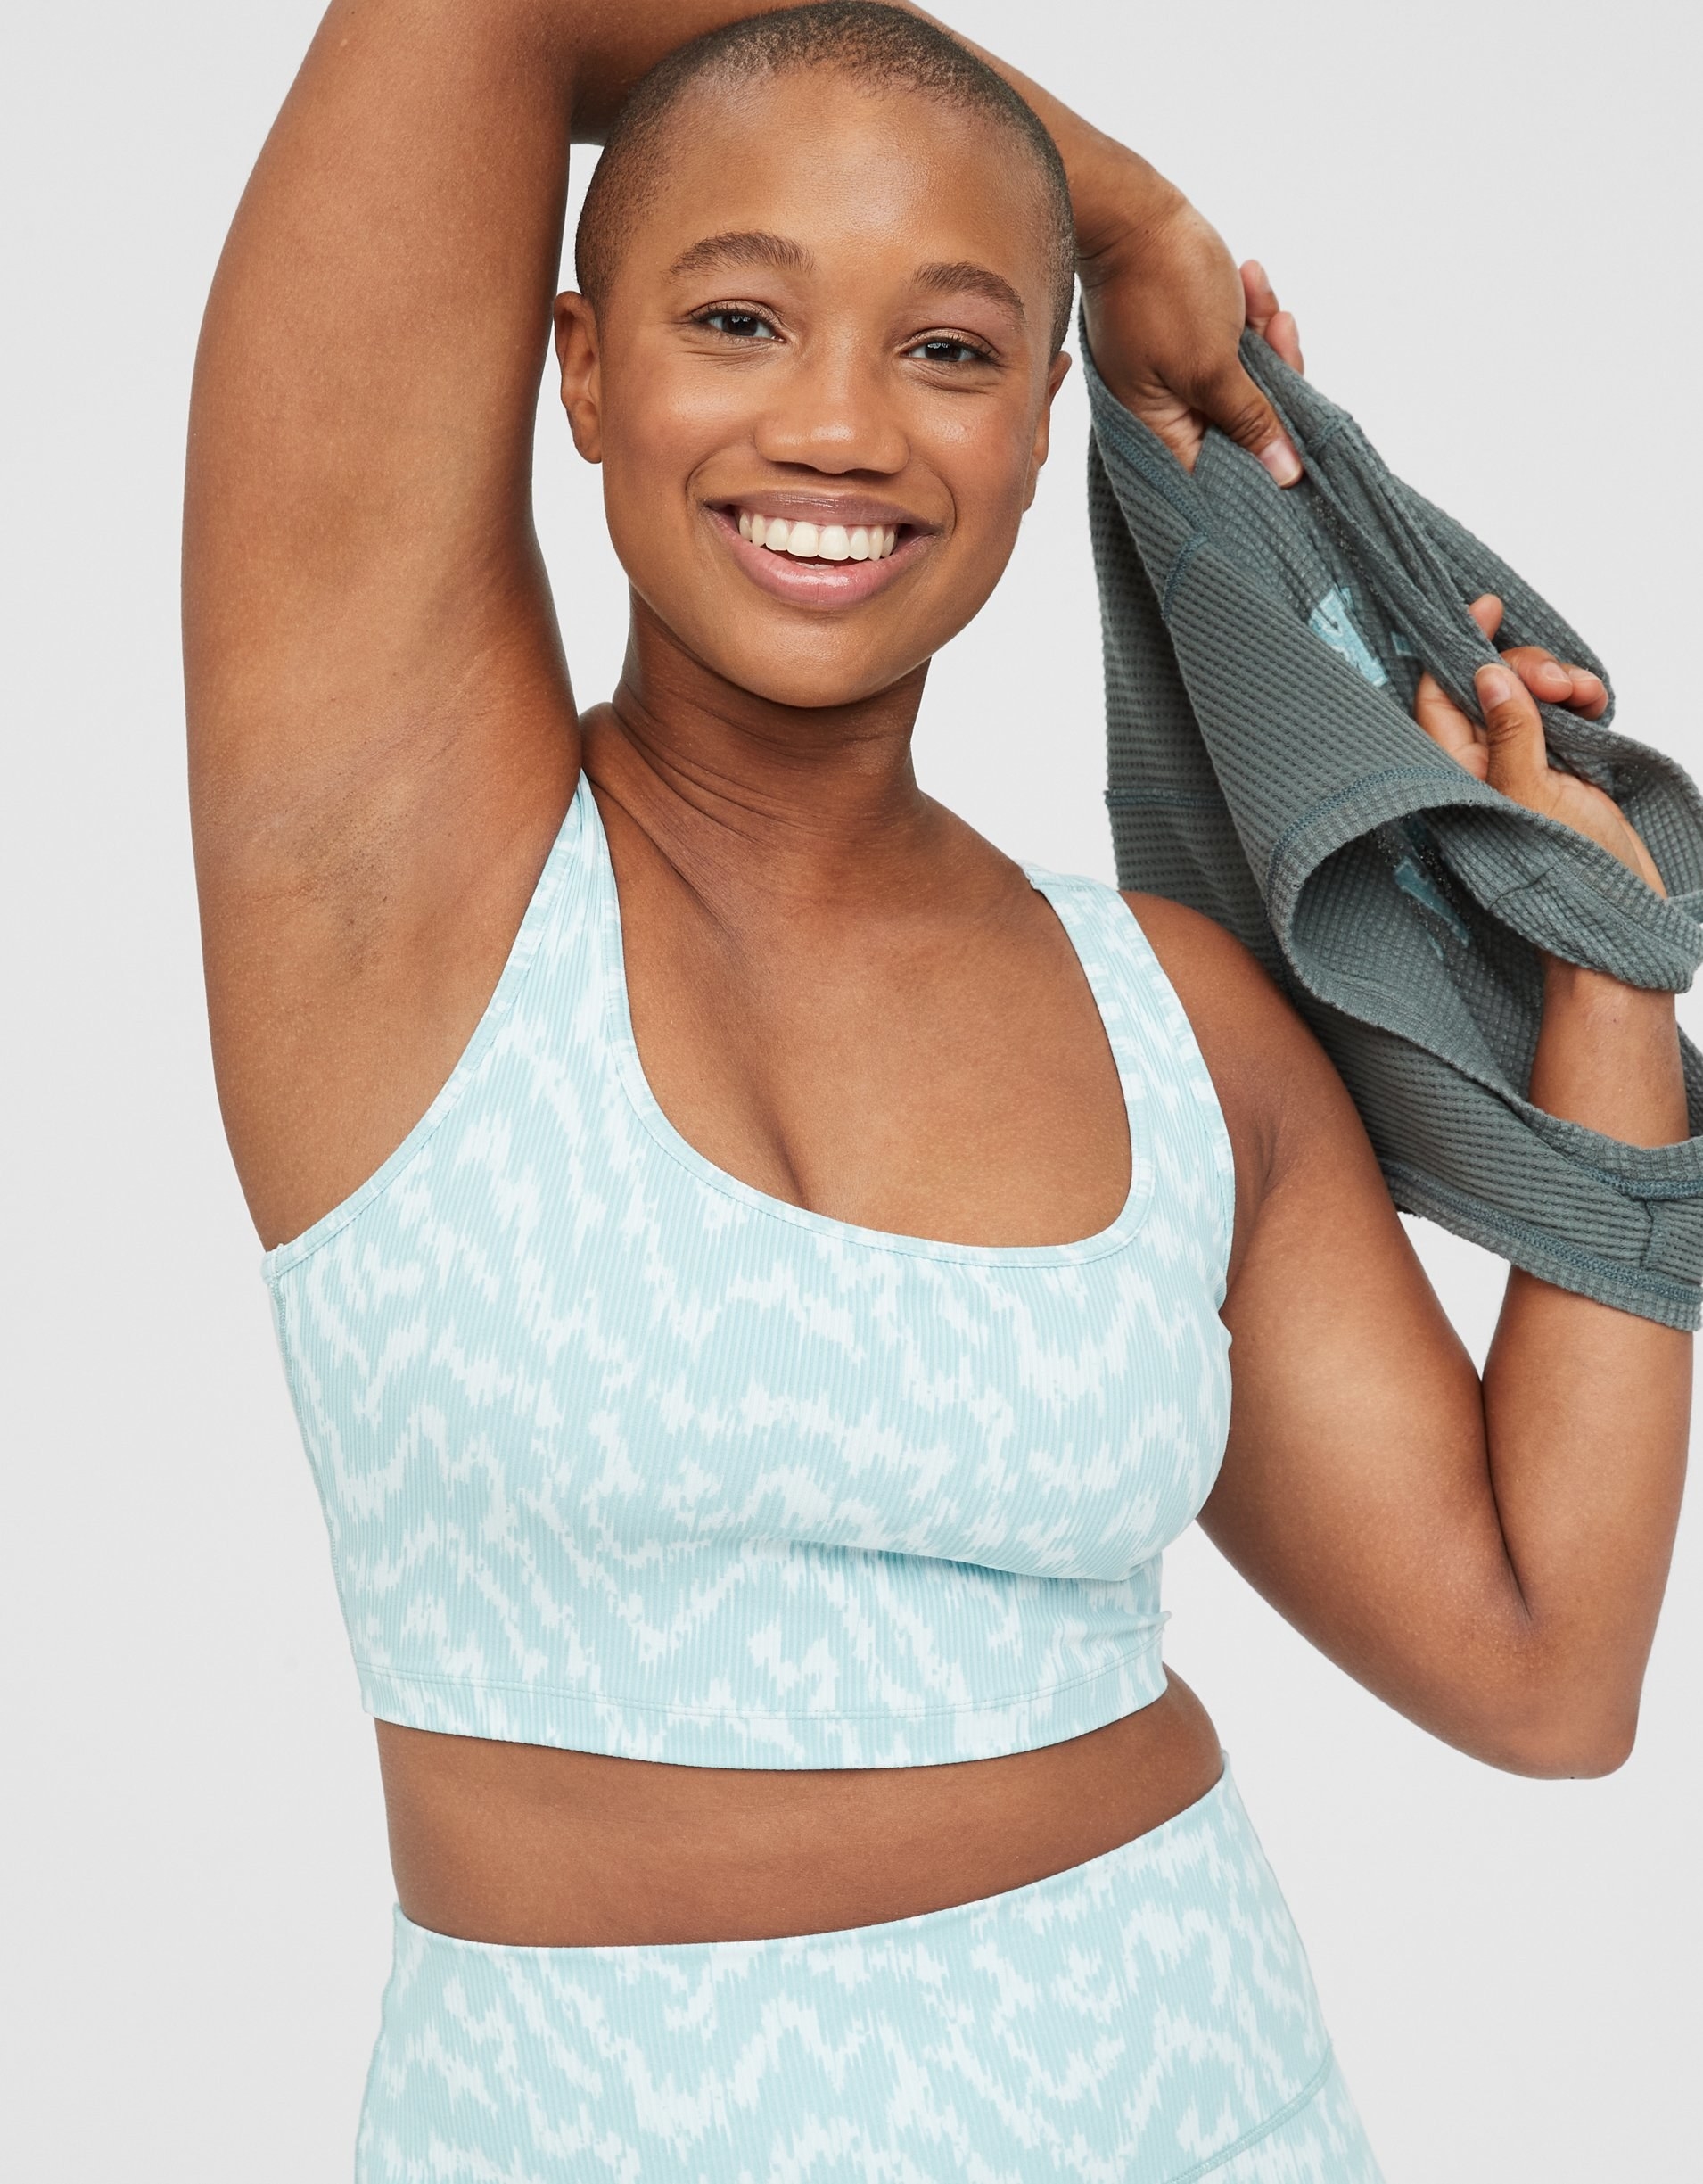 model in light blue and white patterned round-neck sports bra